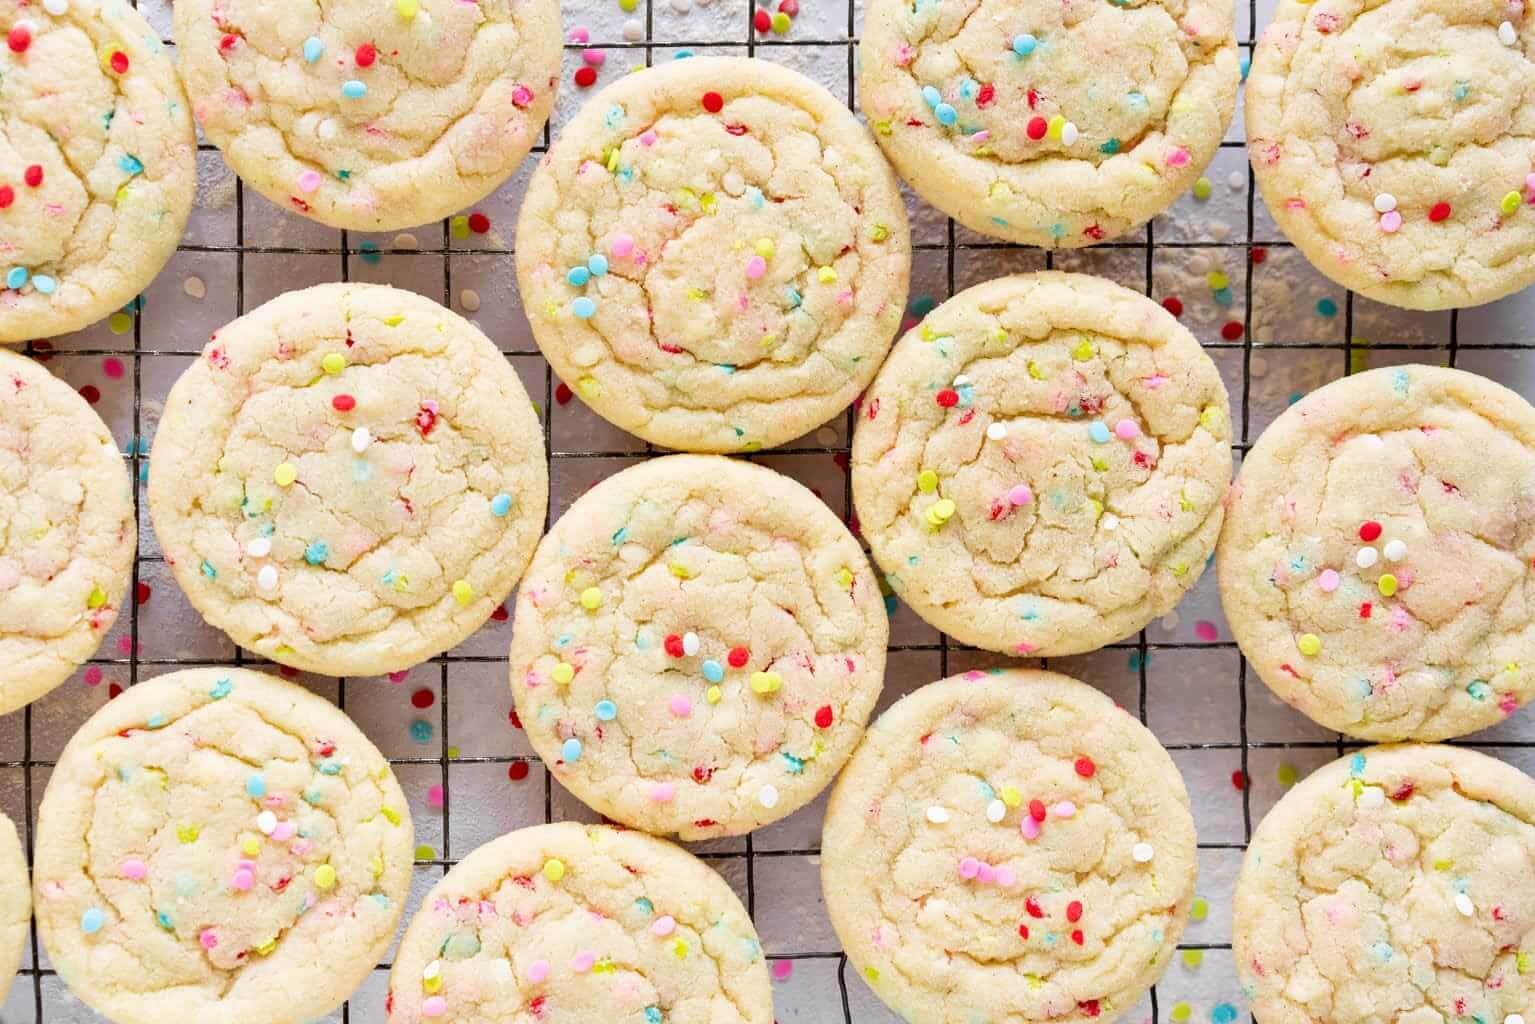 Funfetti are like a party in your mouth! All you need is rainbow sprinkles.